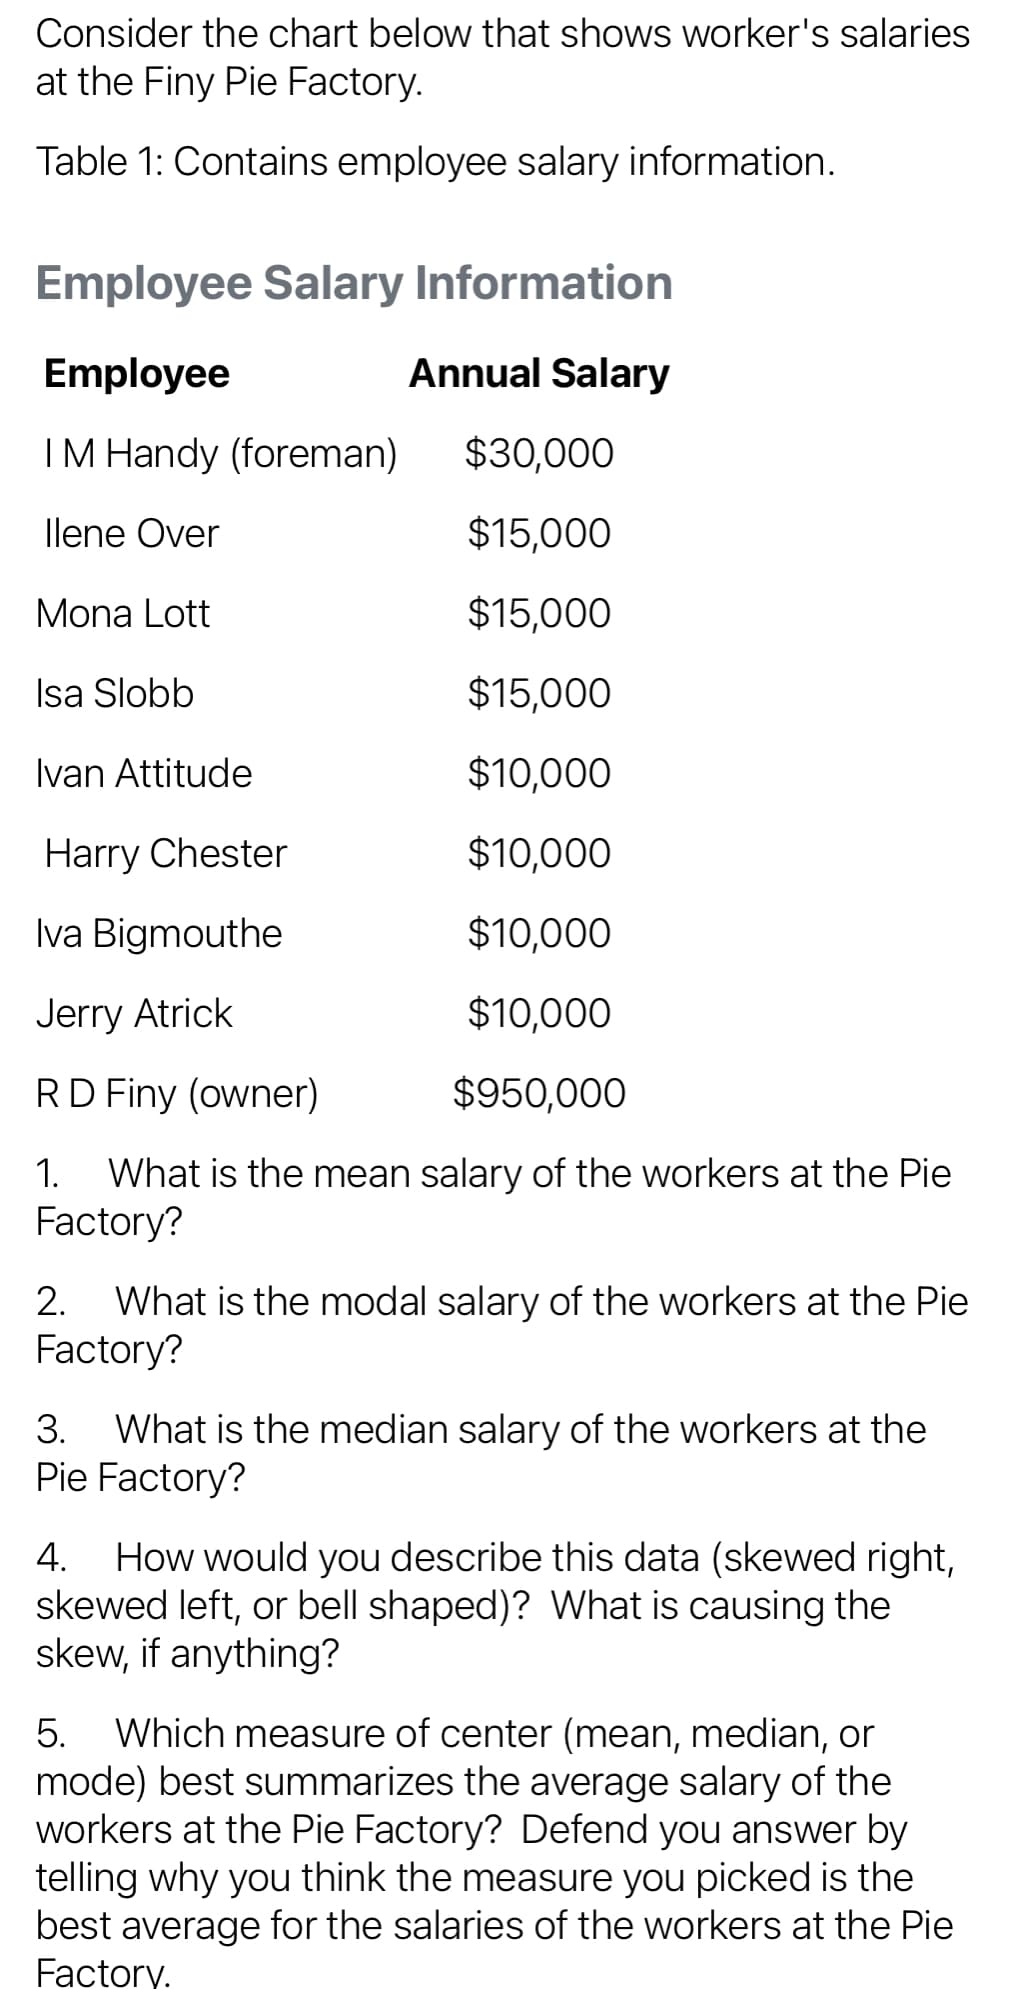 Consider the chart below that shows worker's salaries
at the Finy Pie Factory.
Table 1: Contains employee salary information.
Employee Salary Information
Employee
Annual Salary
IM Handy (foreman)
$30,000
llene Over
$15,000
Mona Lott
$15,000
Isa Slobb
$15,000
Ivan Attitude
$10,000
Harry Chester
$10,000
Iva Bigmouthe
$10,000
Jerry Atrick
$10,000
RD Finy (owner)
$950,000
1. What is the mean salary of the workers at the Pie
Factory?
What is the modal salary of the workers at the Pie
Factory?
2.
What is the median salary of the workers at the
Pie Factory?
3.
4. How would you describe this data (skewed right,
skewed left, or bell shaped)? What is causing the
skew, if anything?
5. Which measure of center (mean, median, or
mode) best summarizes the average salary of the
workers at the Pie Factory? Defend you answer by
telling why you think the measure you picked is the
best average for the salaries of the workers at the Pie
Factory.
